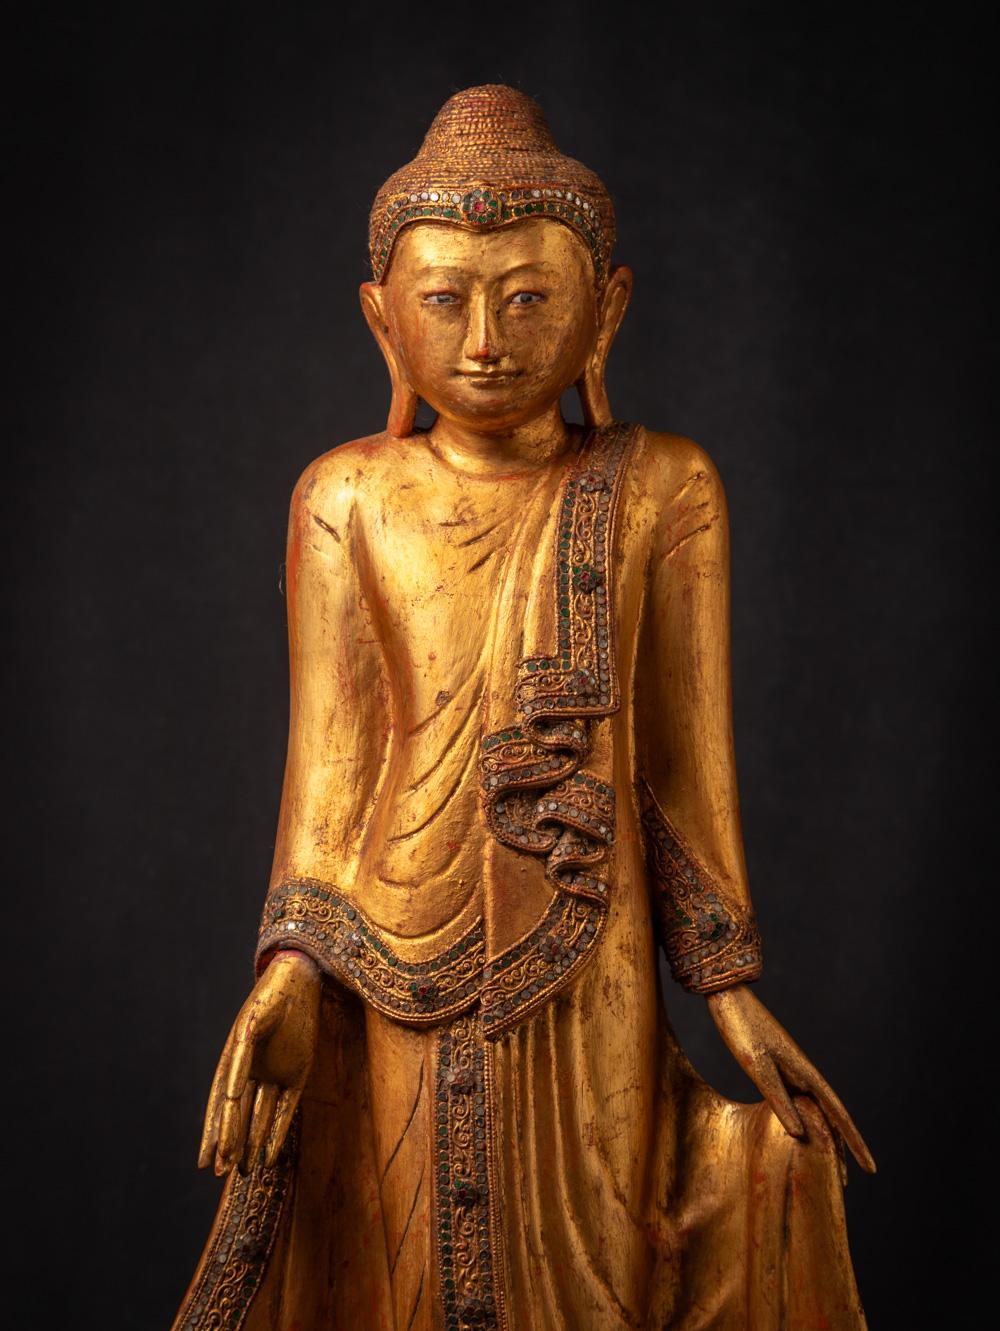 This Antique wooden Mandalay Buddha statue from Burma during the Early 20th century, is a fine example of Mandalay style craftsmanship. It stands at a height of 88,5 cm and boasts dimensions of 36,5 cm in width and 24,2 cm in depth, making it a